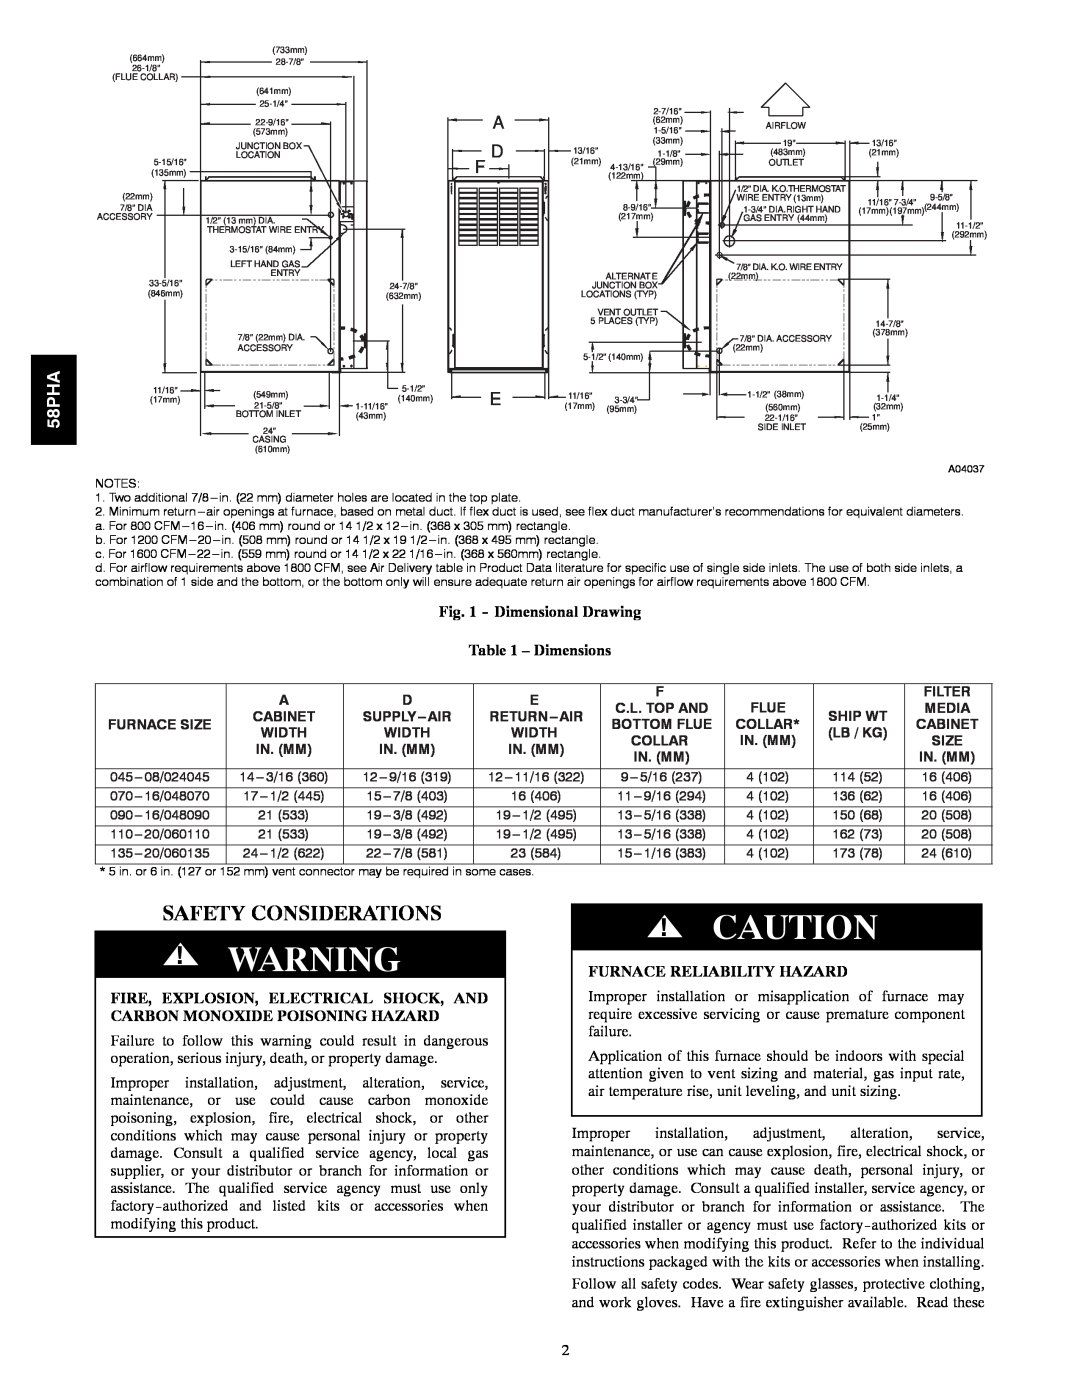 Carrier 58PHA/PHX instruction manual Safety Considerations, Dimensional Drawing - Dimensions, Furnace Reliability Hazard 